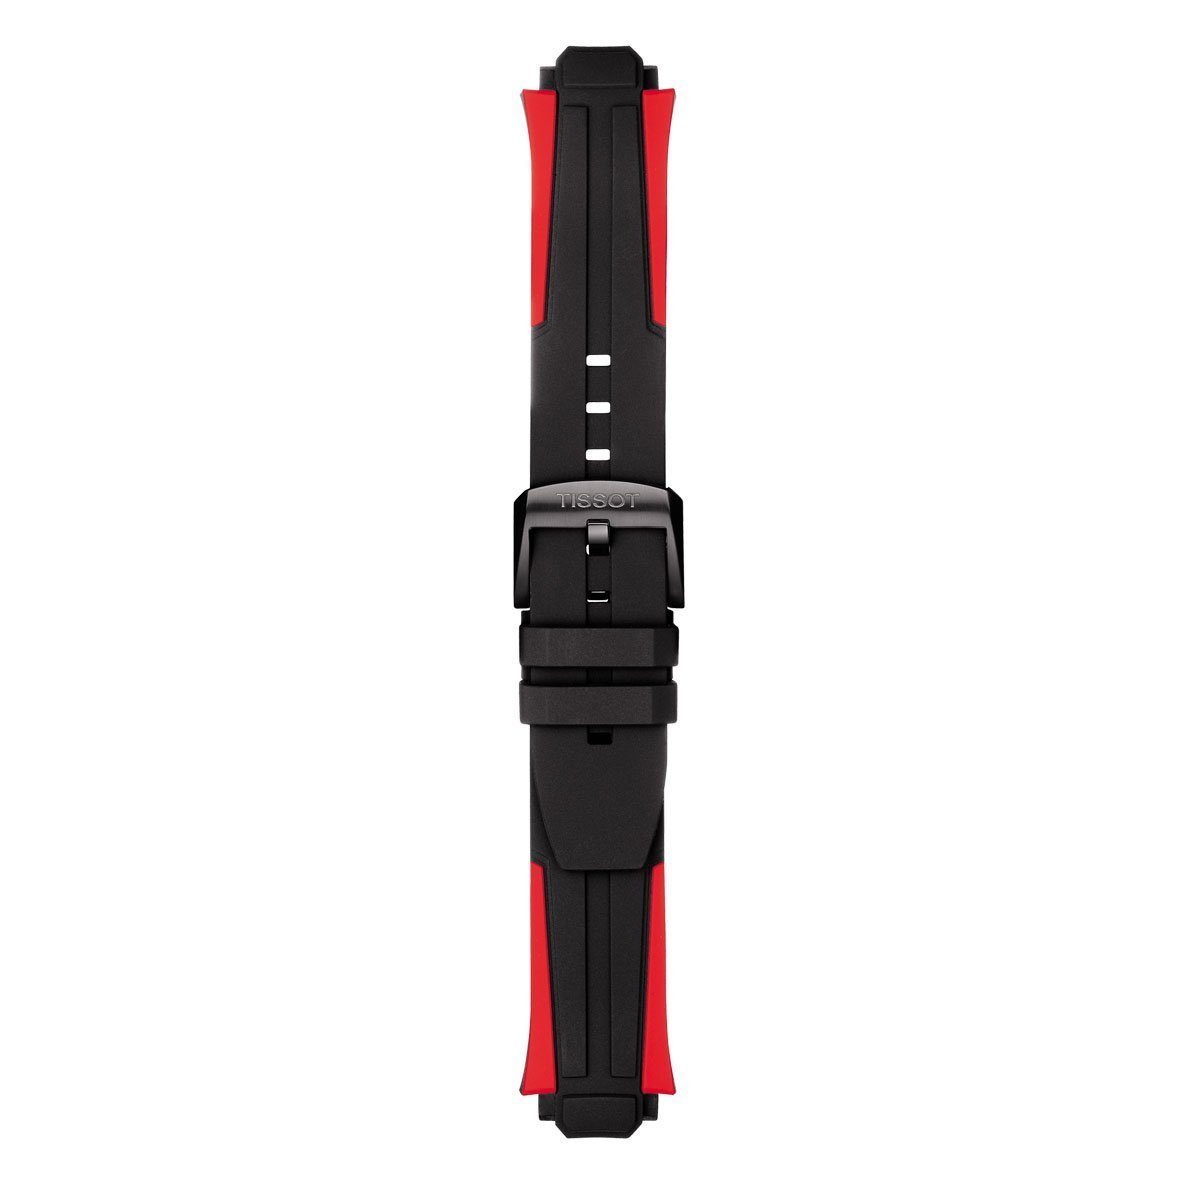 TISSOT T-RACE CYCLING BLACK/RED SILICONE WATCH STRAP image